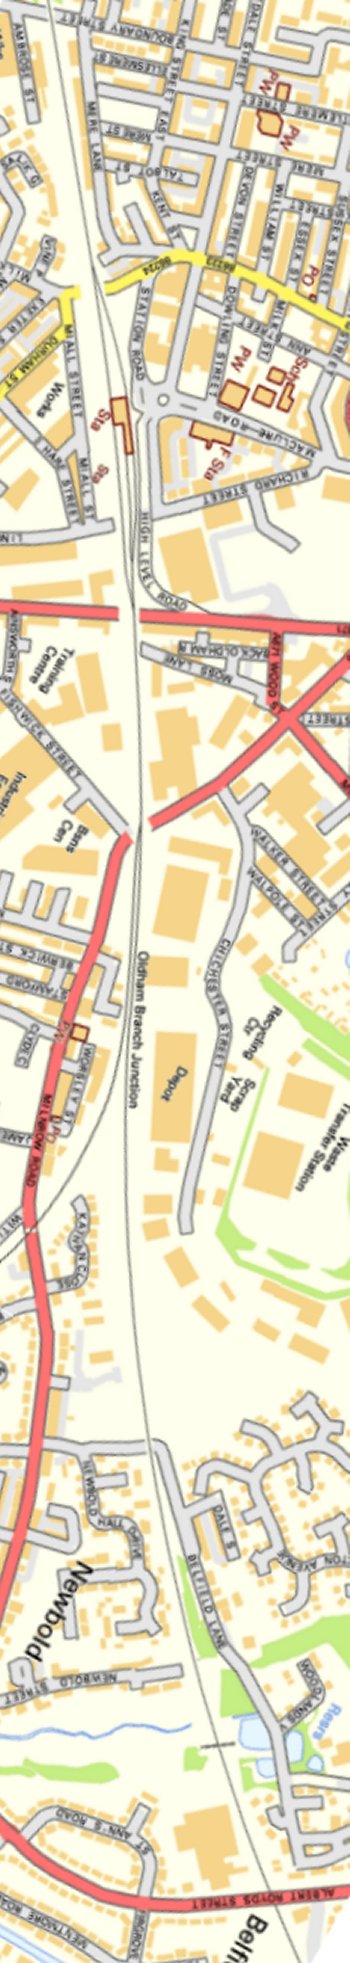 Section from Ordnance Survey OpenSource mapping 2013 showing L&YR railway line at Rochdale Station